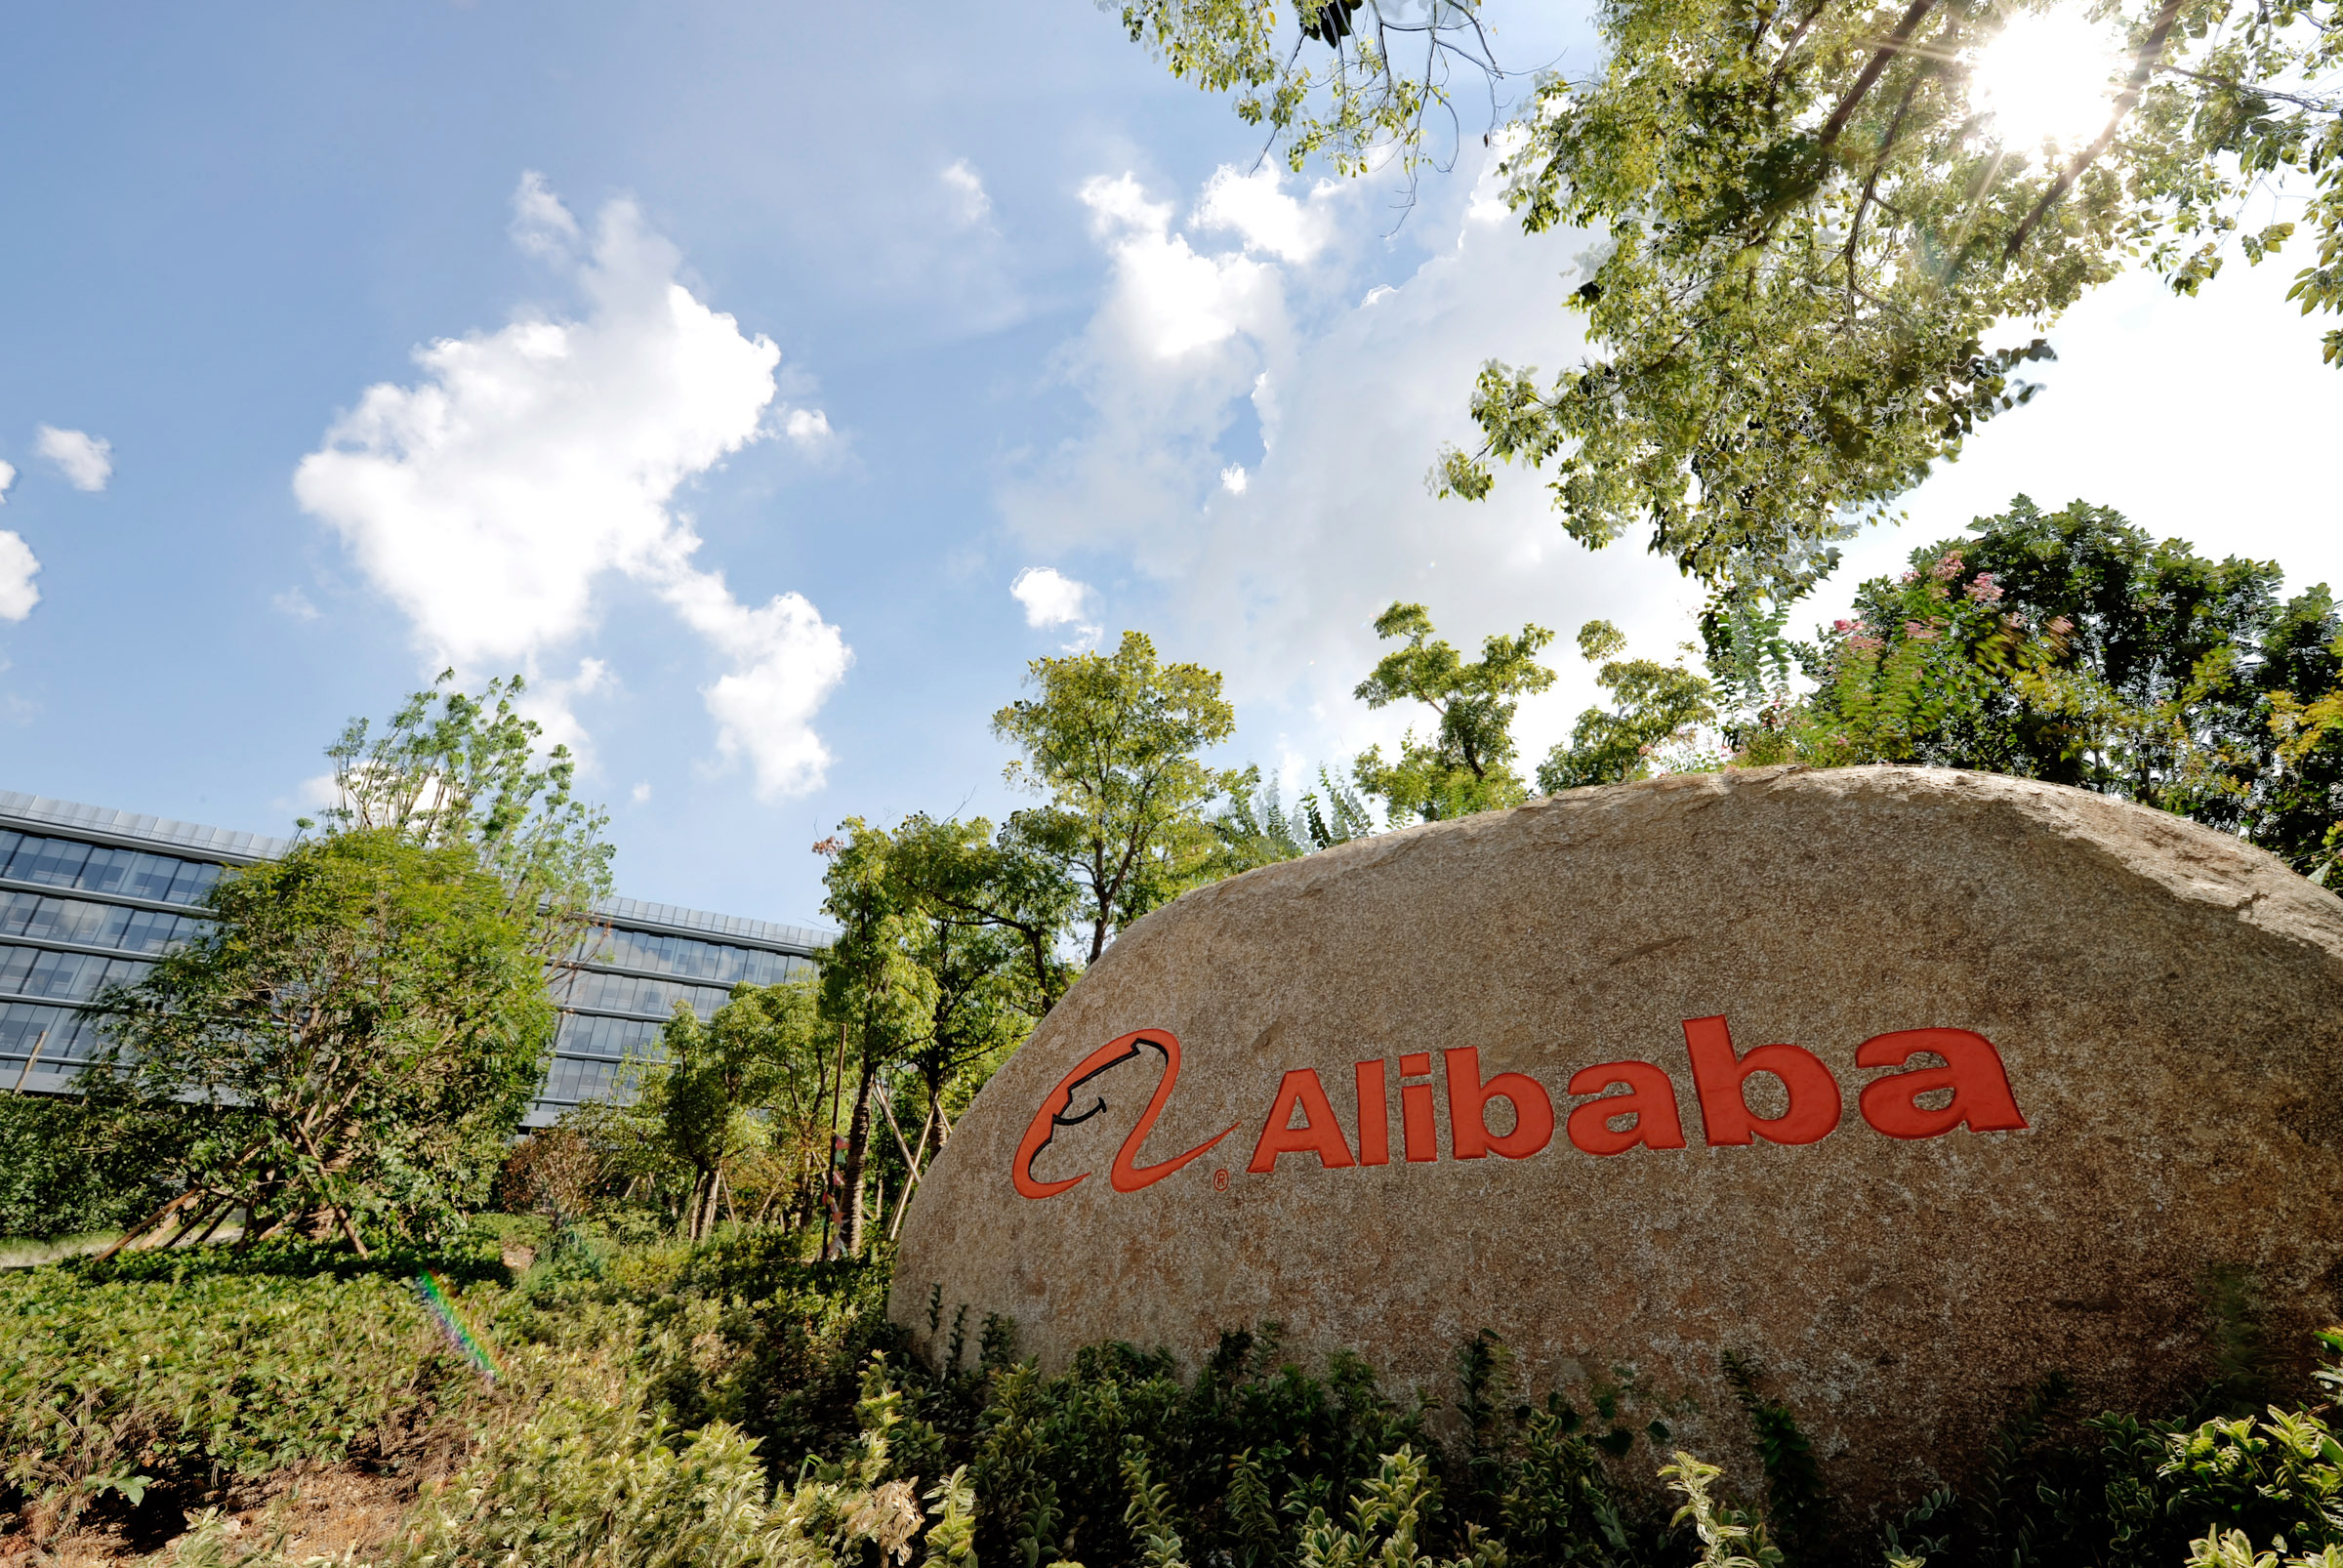 Alibaba Stock Is Rising Today: What's Going On?